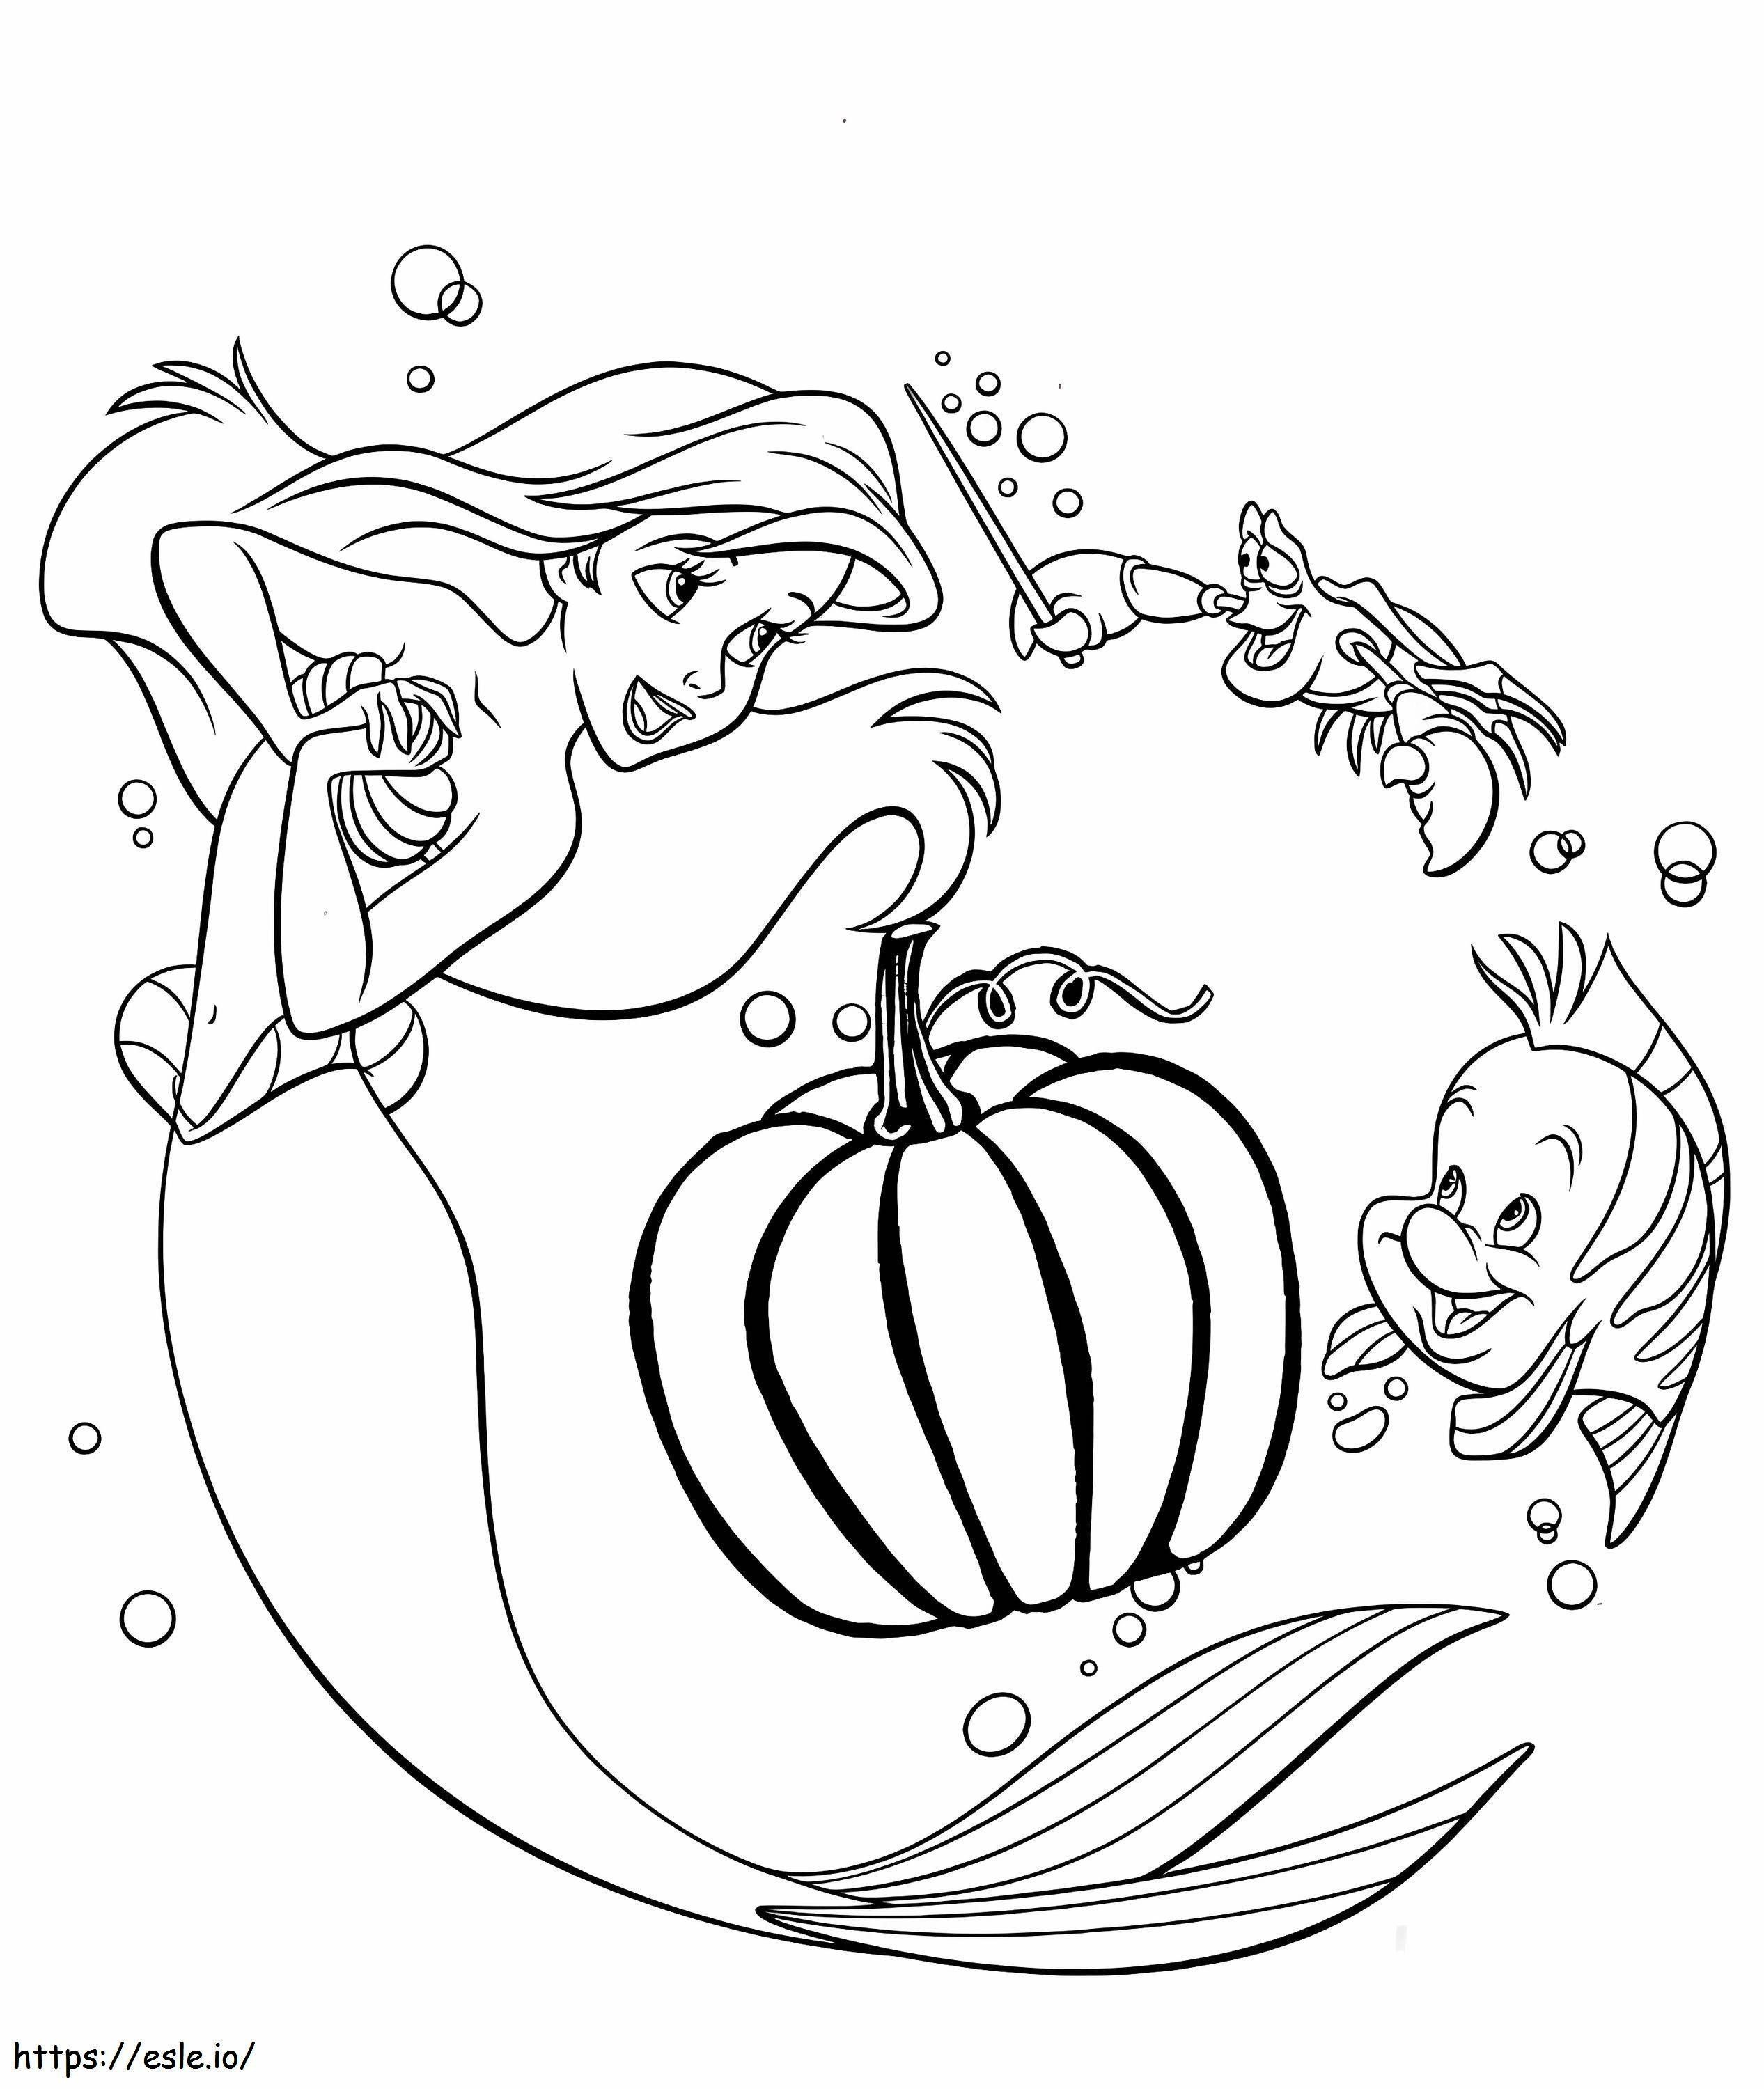 Disney Mermaid Princess And Her Friends coloring page